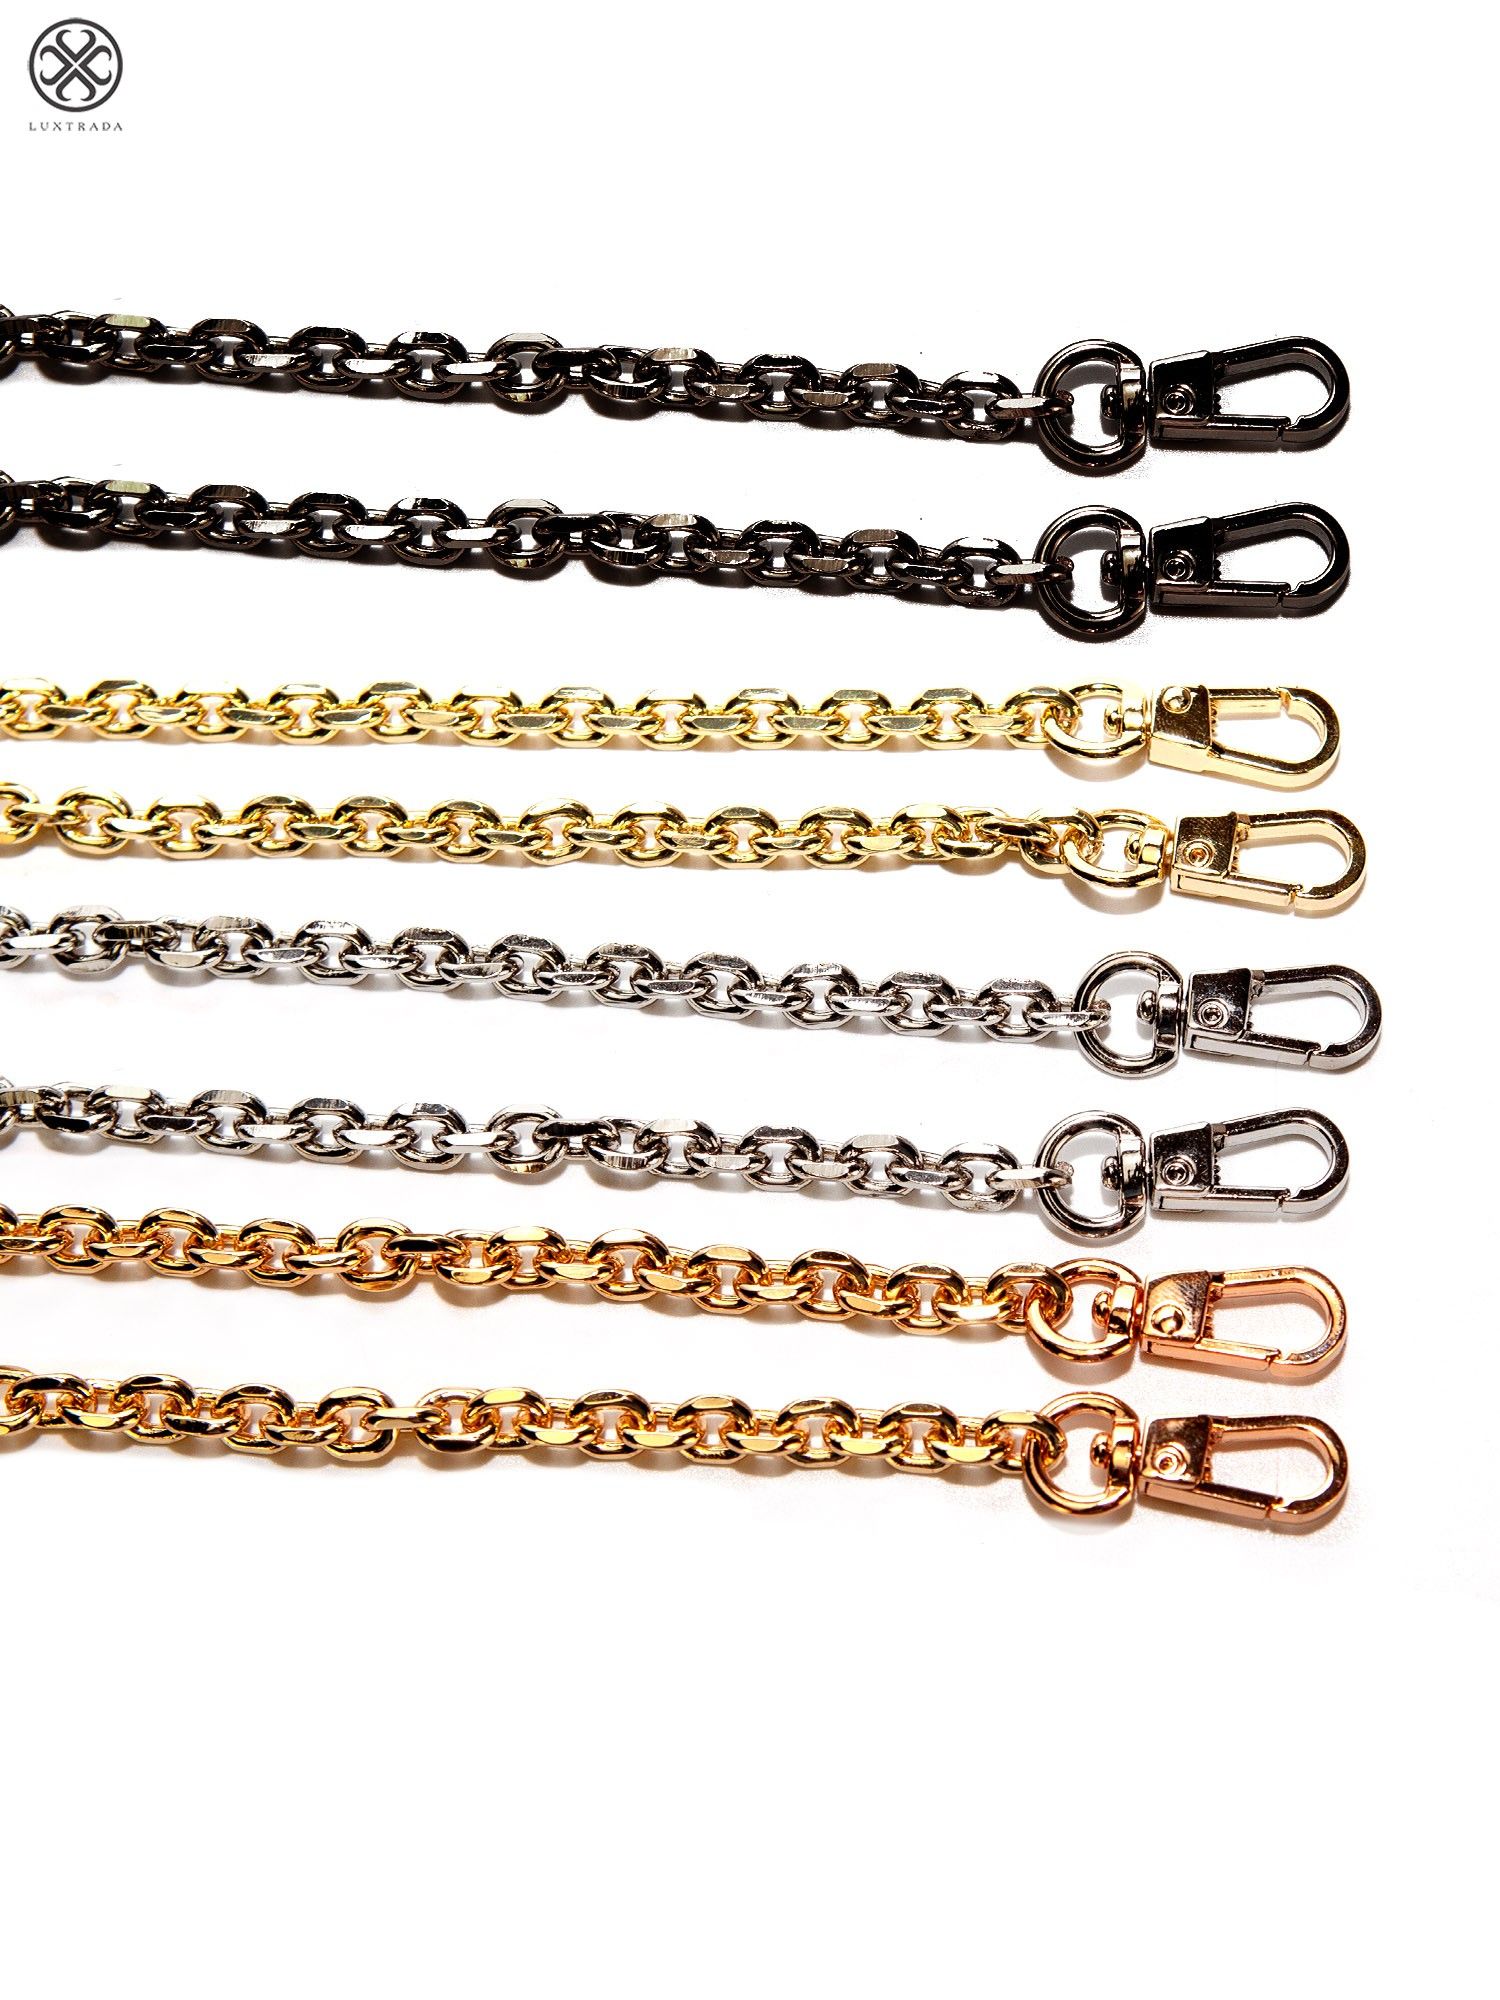 Luxtrada 47 inch Purse Chain Strap-Handbags Replacement Chains Metal Chain Strap for Wallet Bag Crossbody Shoulder Chain Champagne Gold, Women's, Size